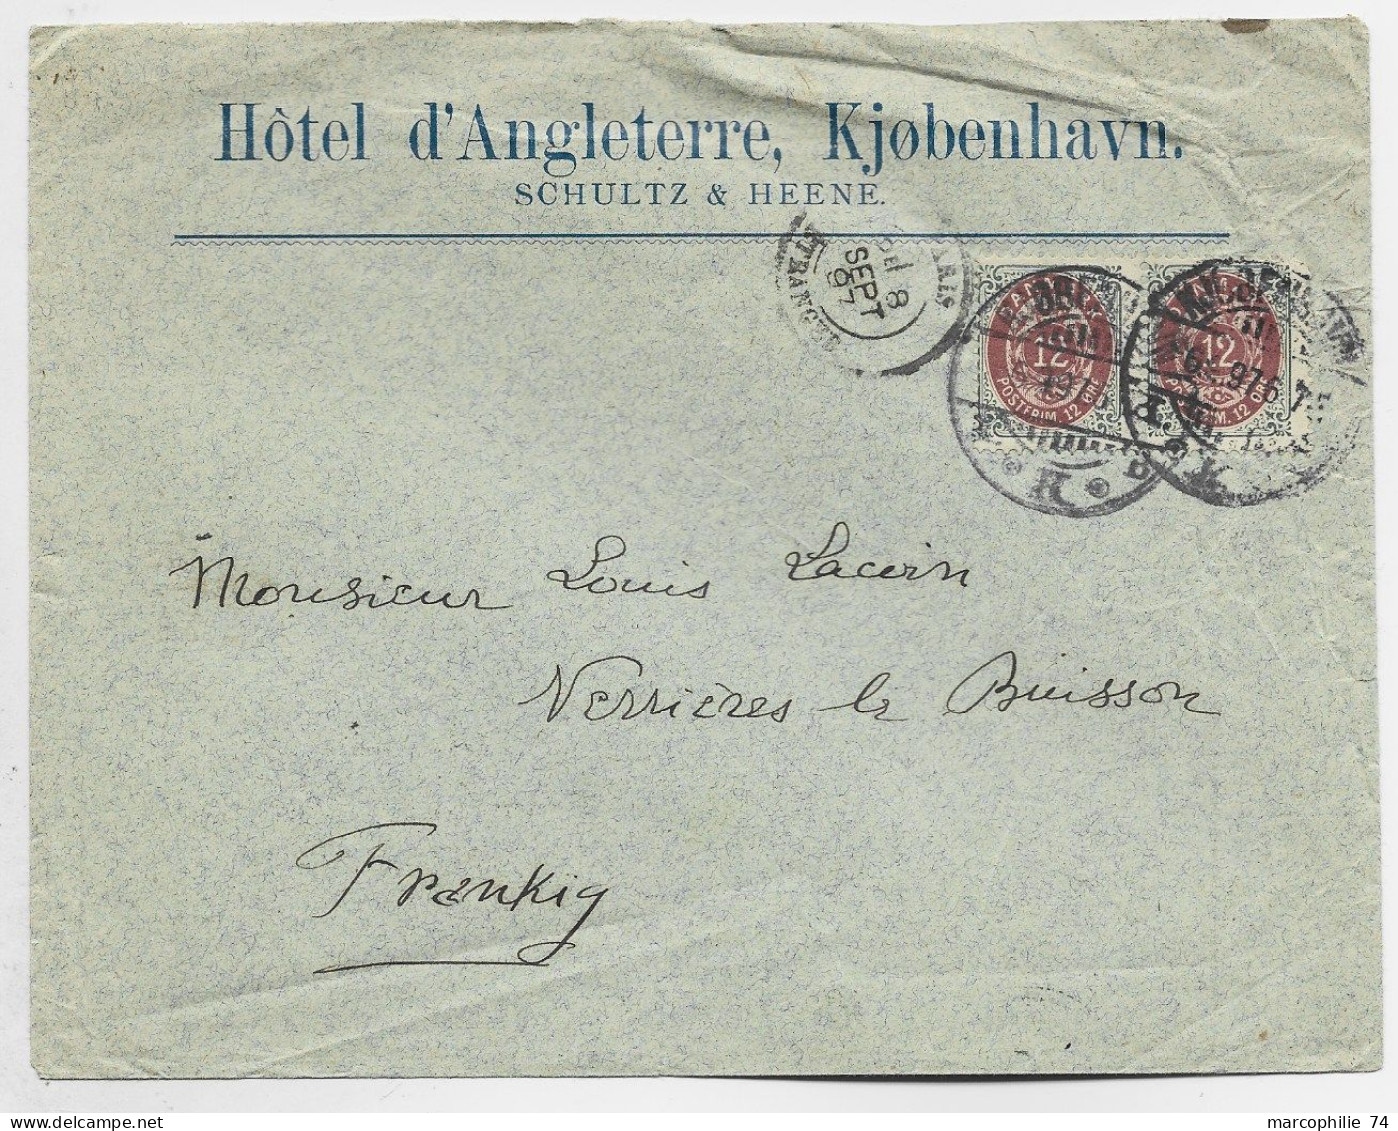 DANMARK 12 ORE PAIRE LETTRE COVER ENTETE HOTEL D'ANGLETERRE 1897  TO FRANCE - Storia Postale